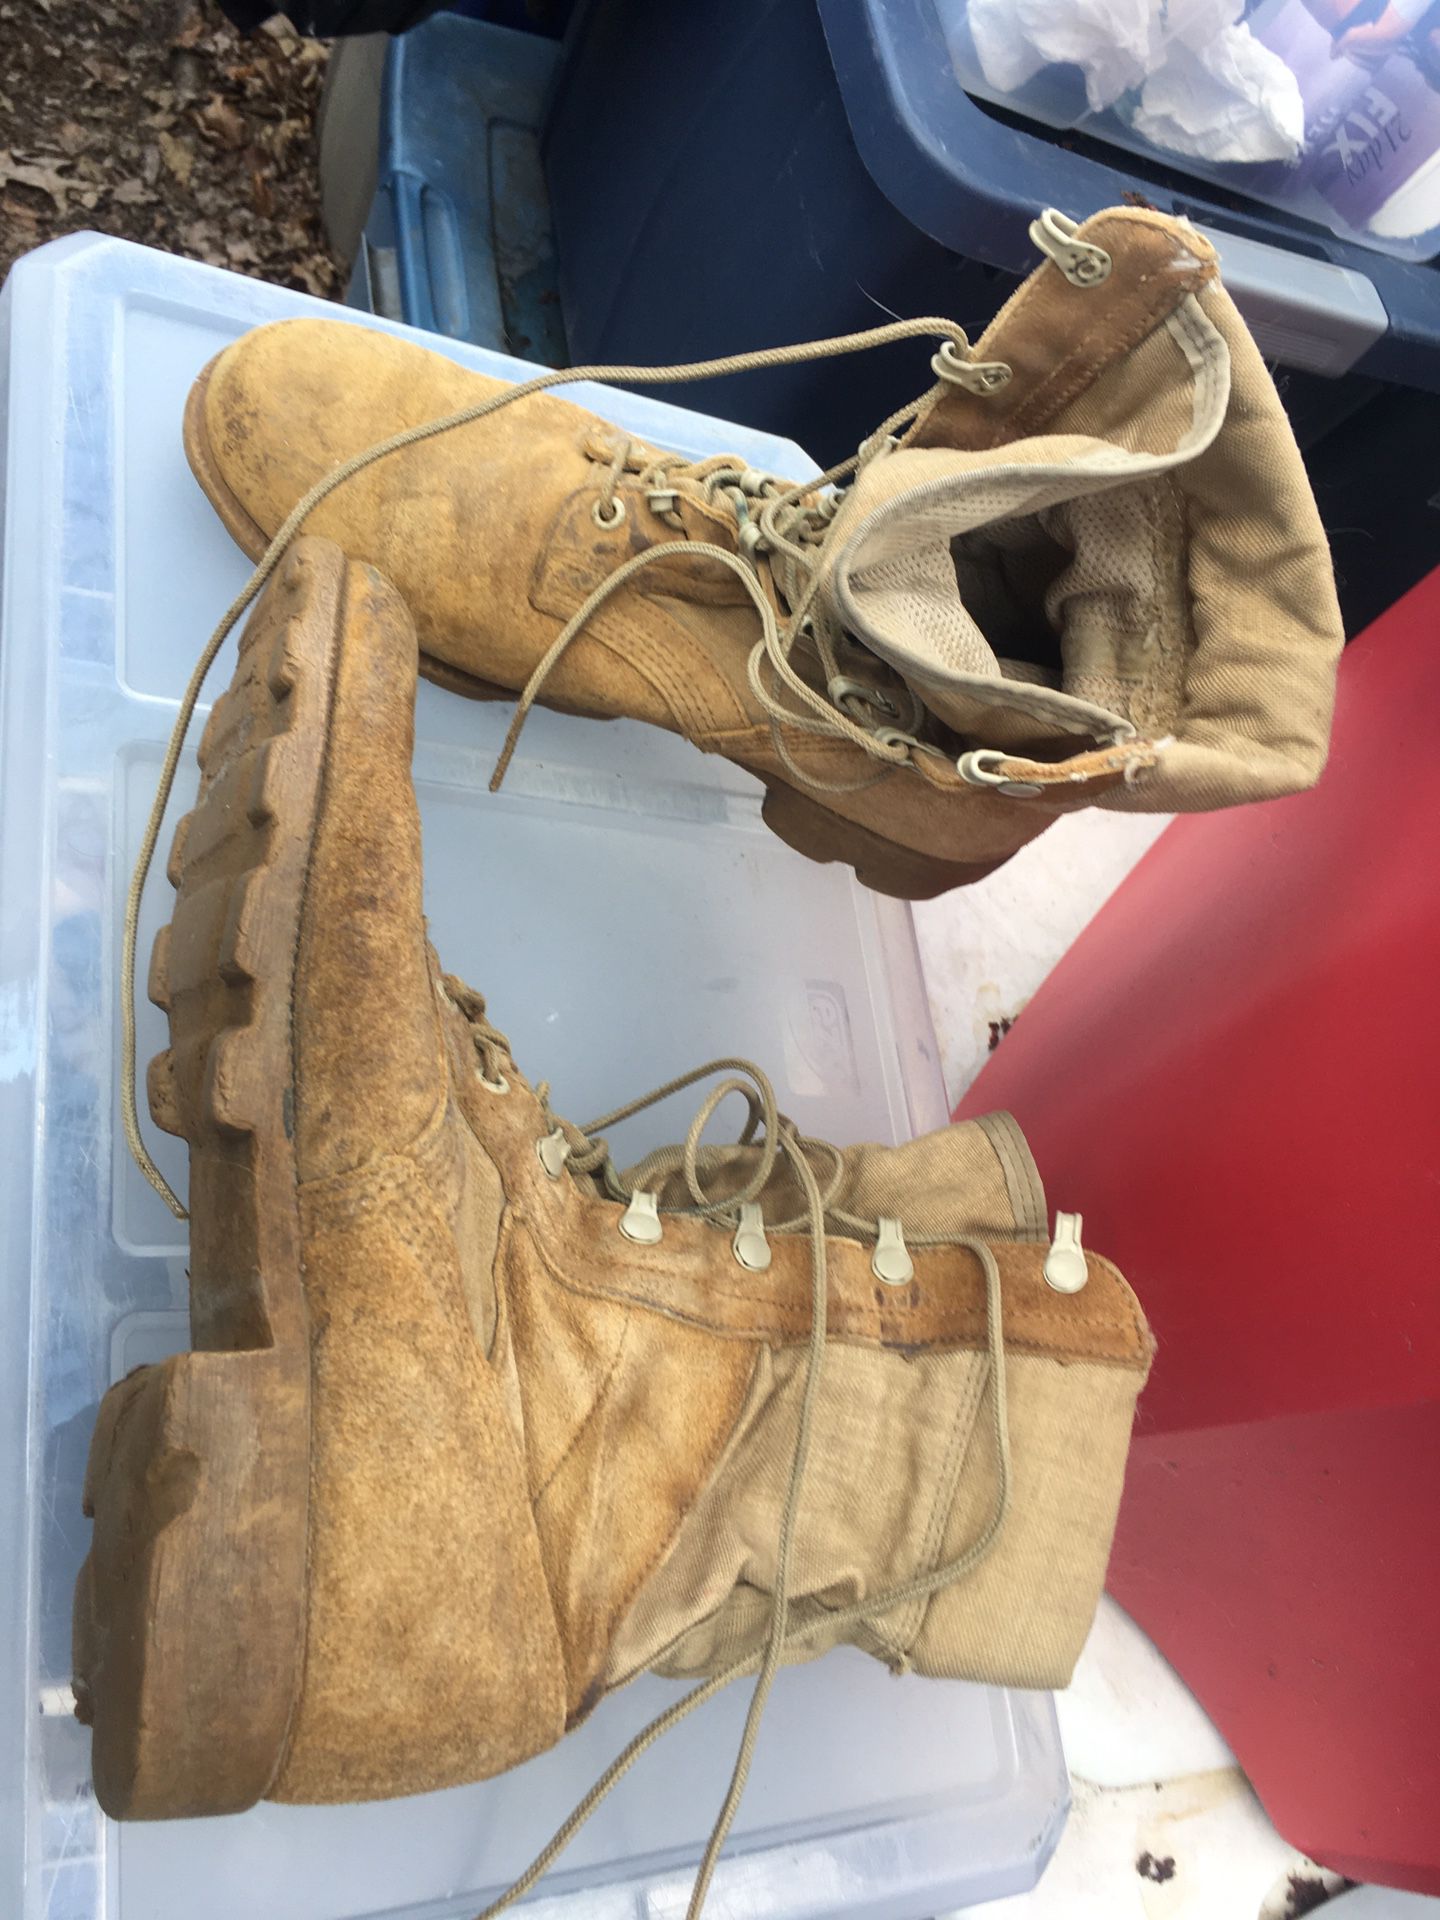 Military Boots Size 8 Only $40